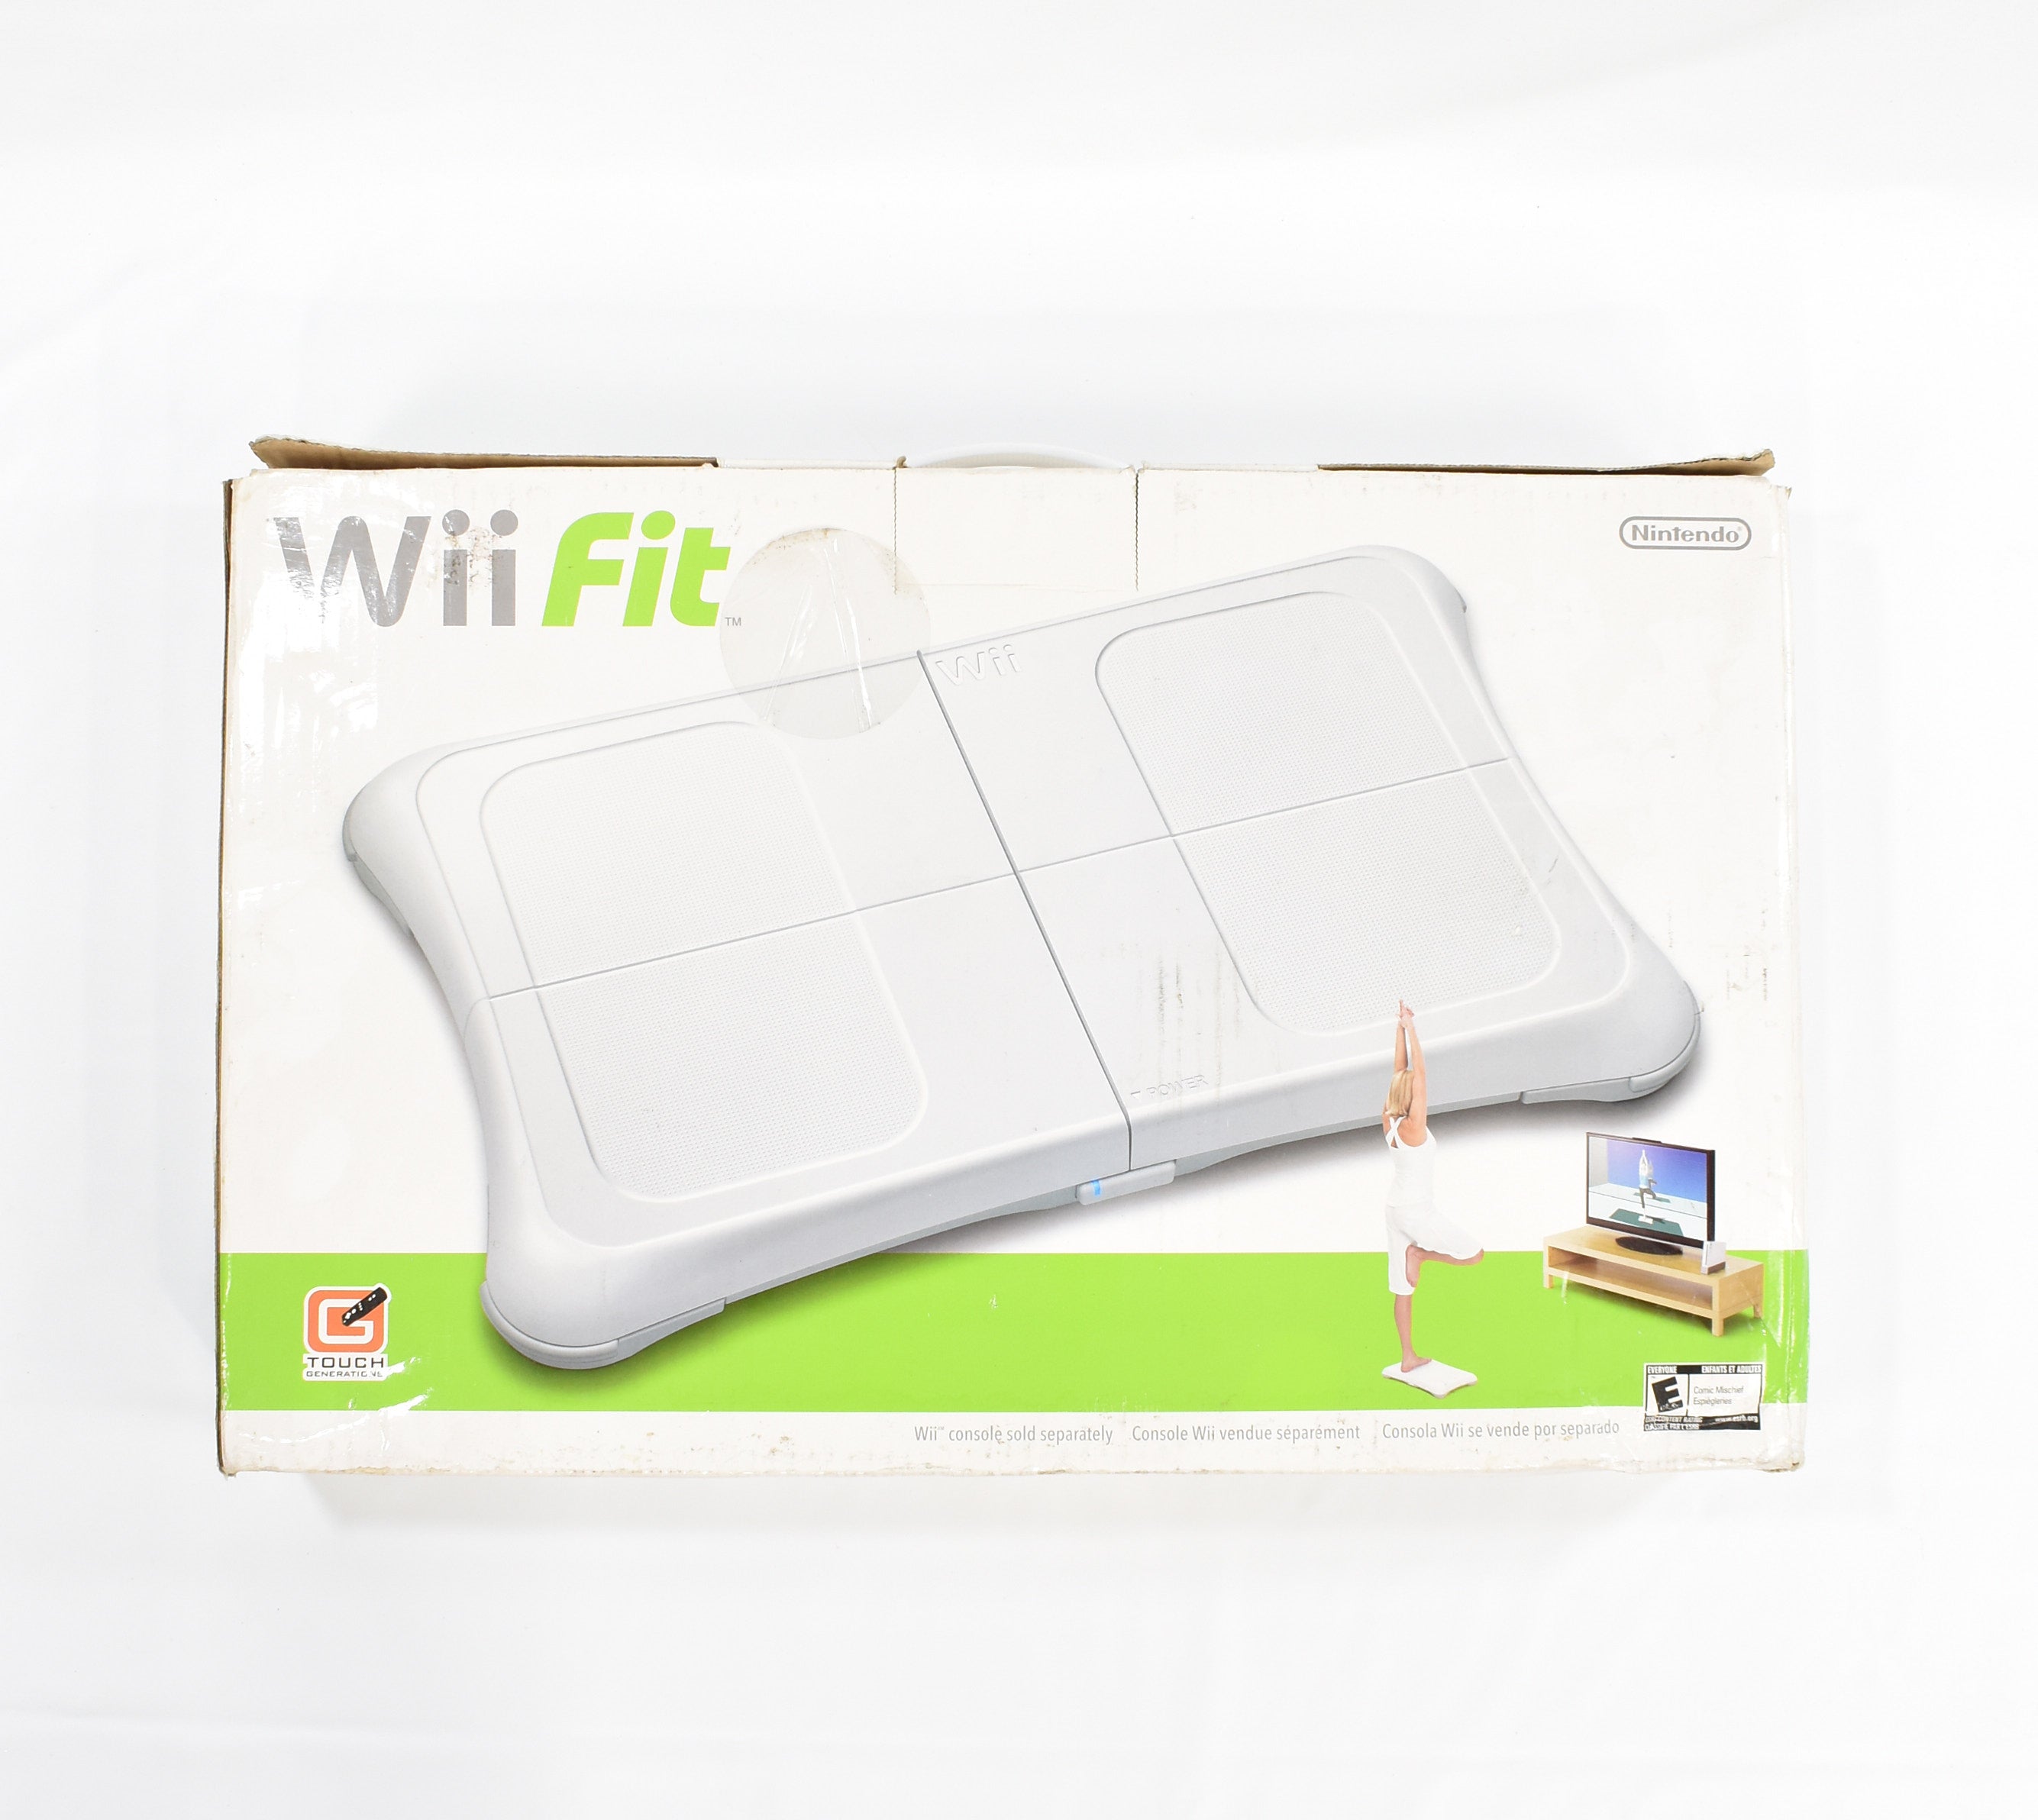 Wii Fit Fitness Board White With Box Used Nintendo